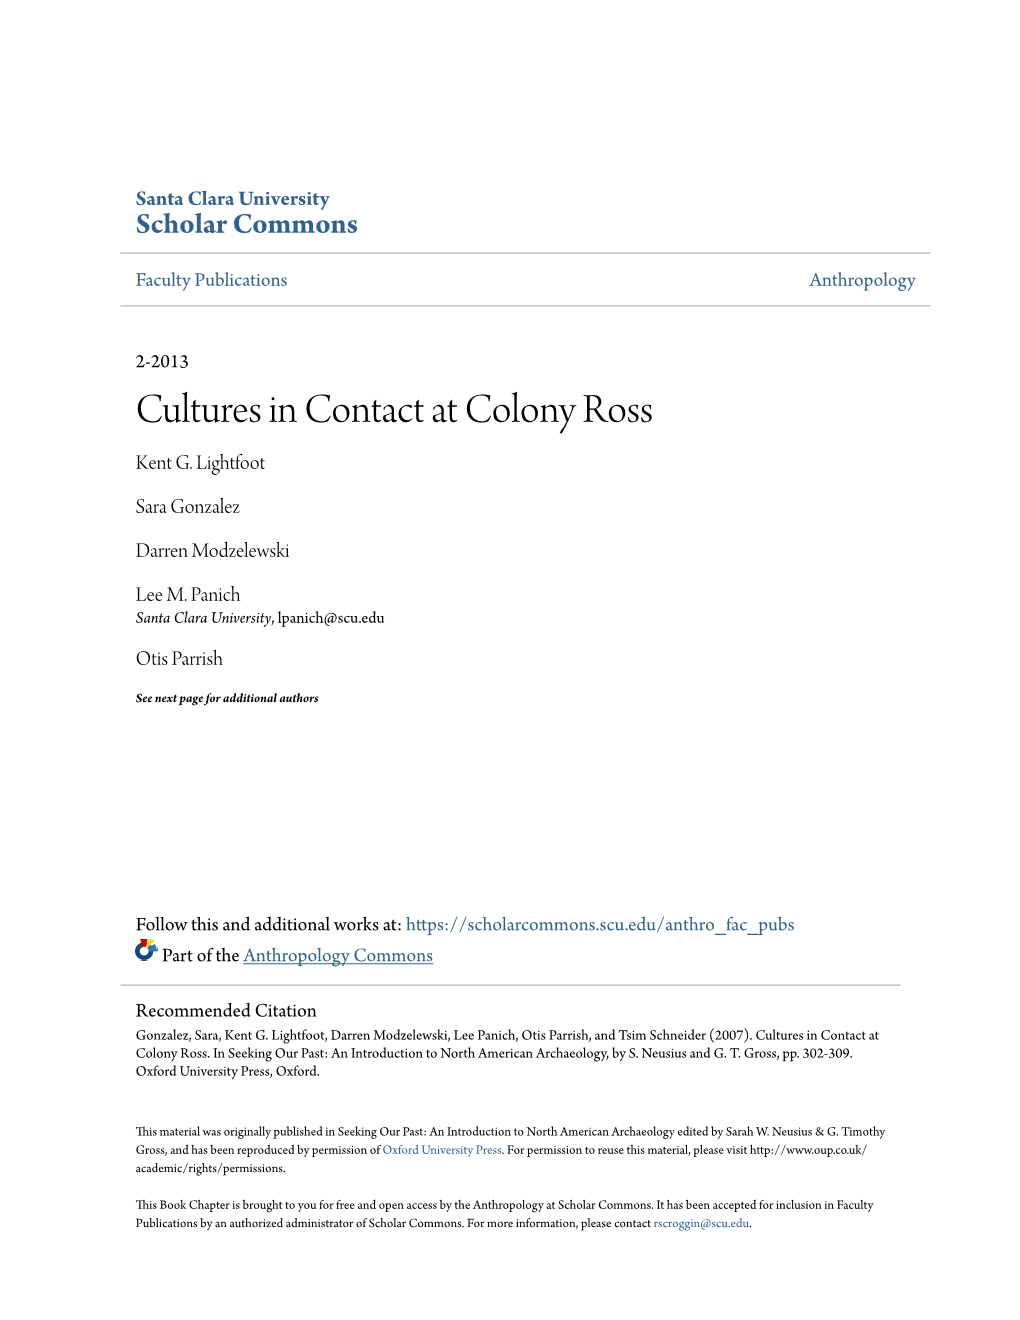 Cultures in Contact at Colony Ross Kent G